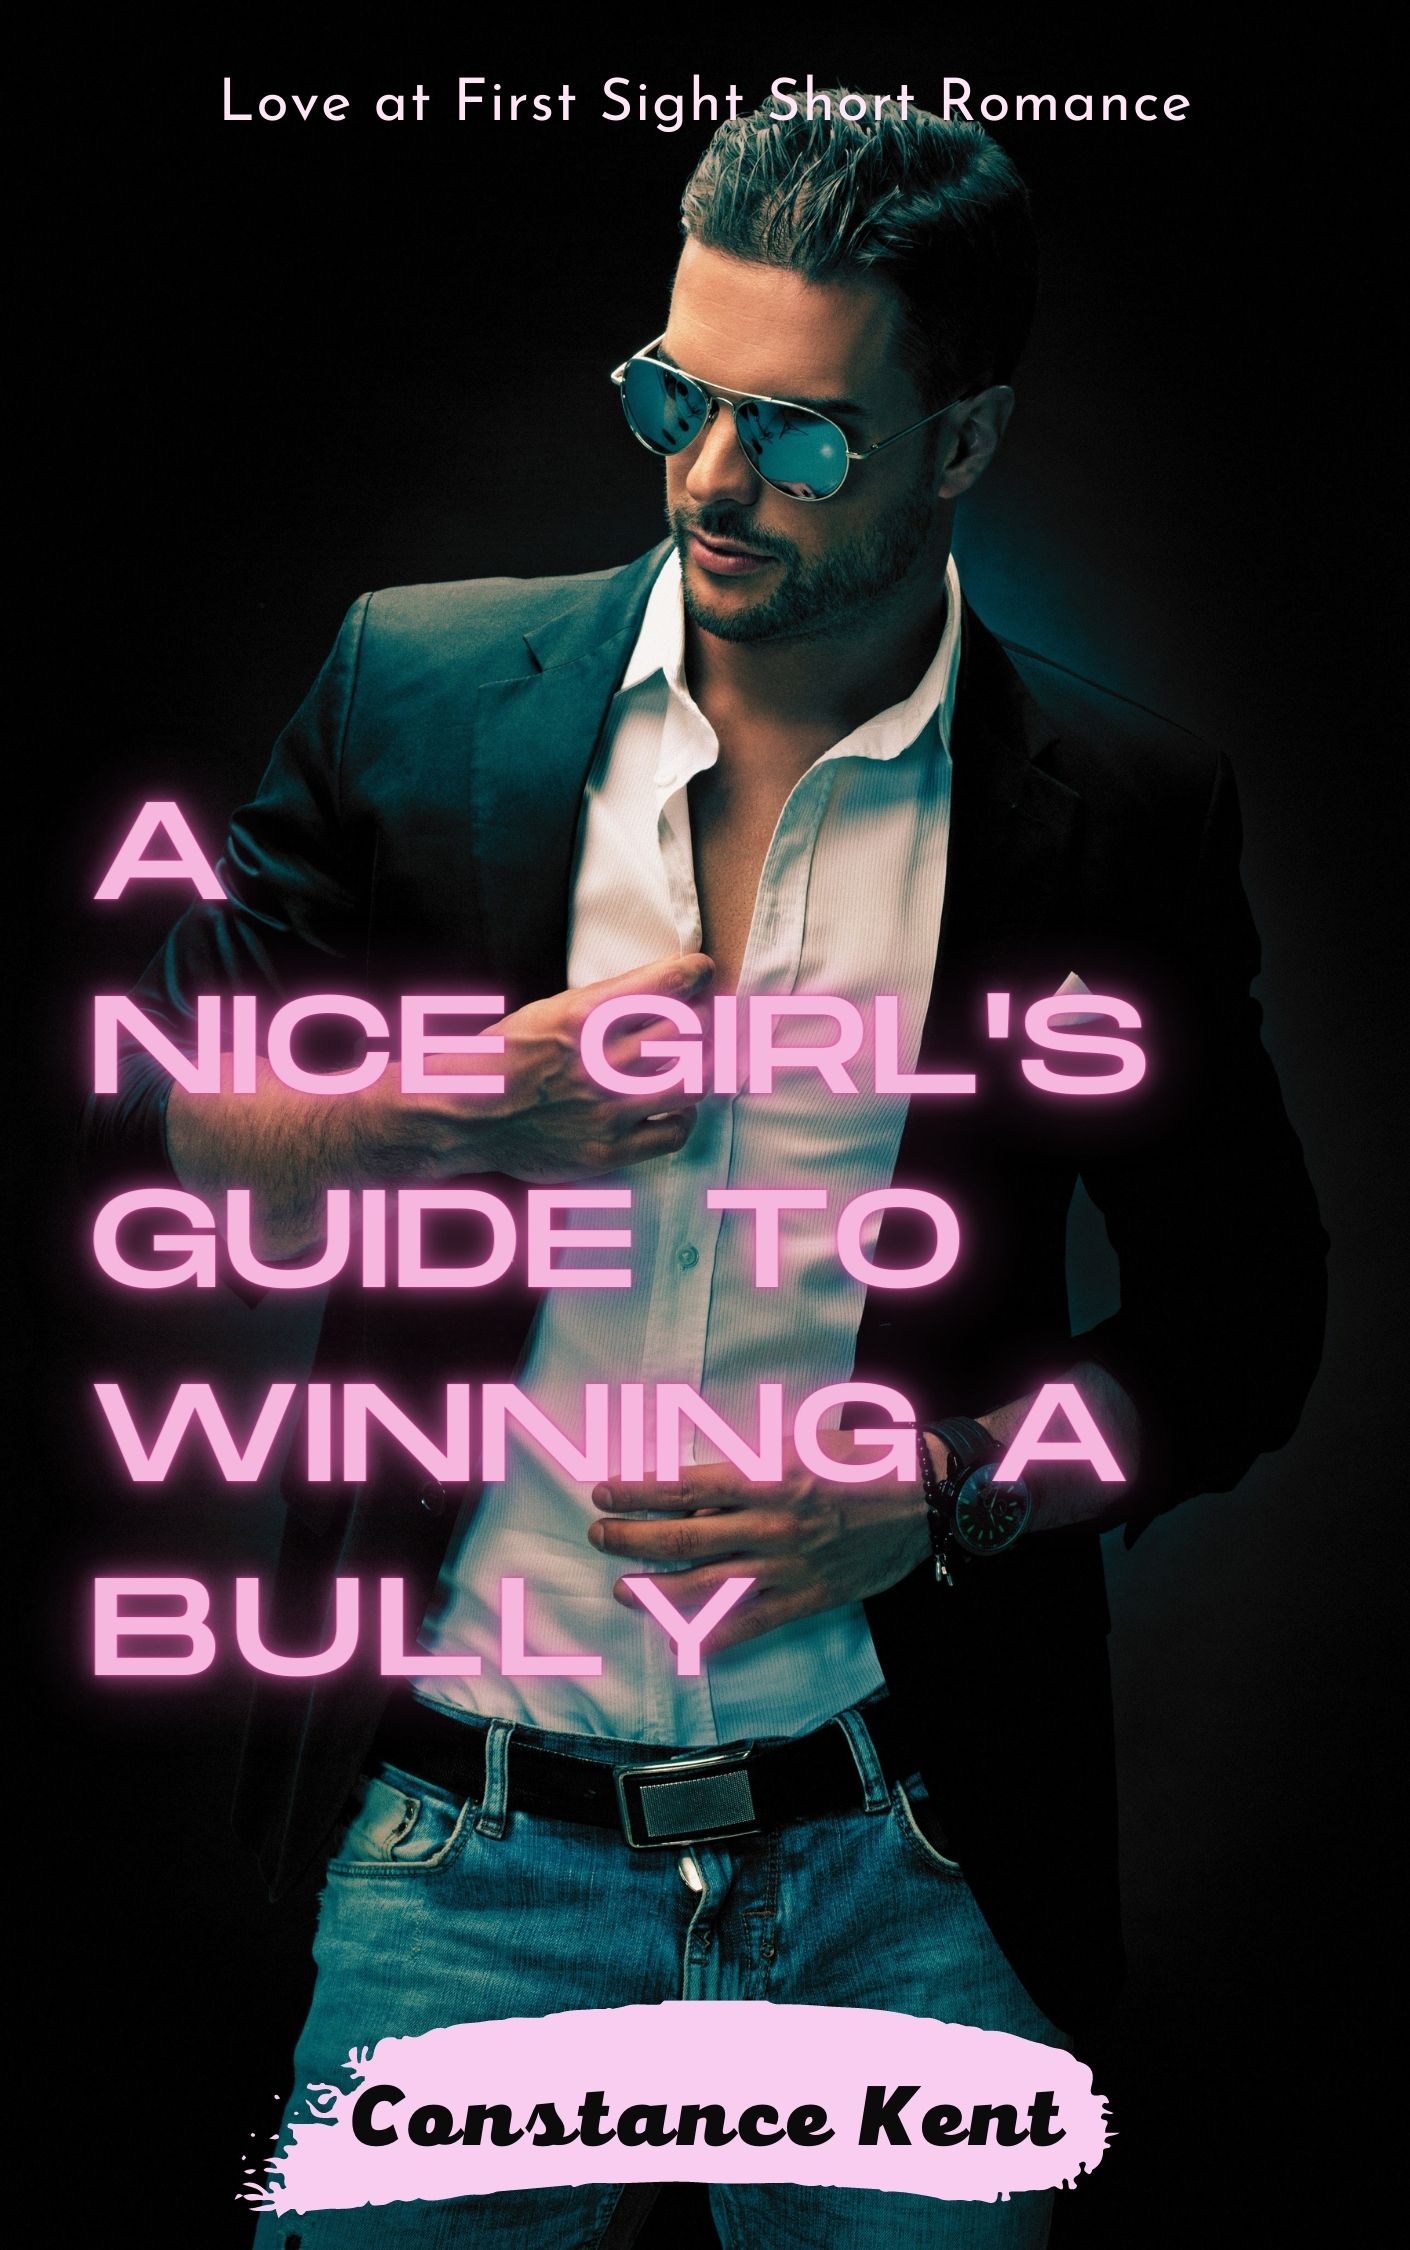 A Nice Girl's Guide to Winning a Bully short romance